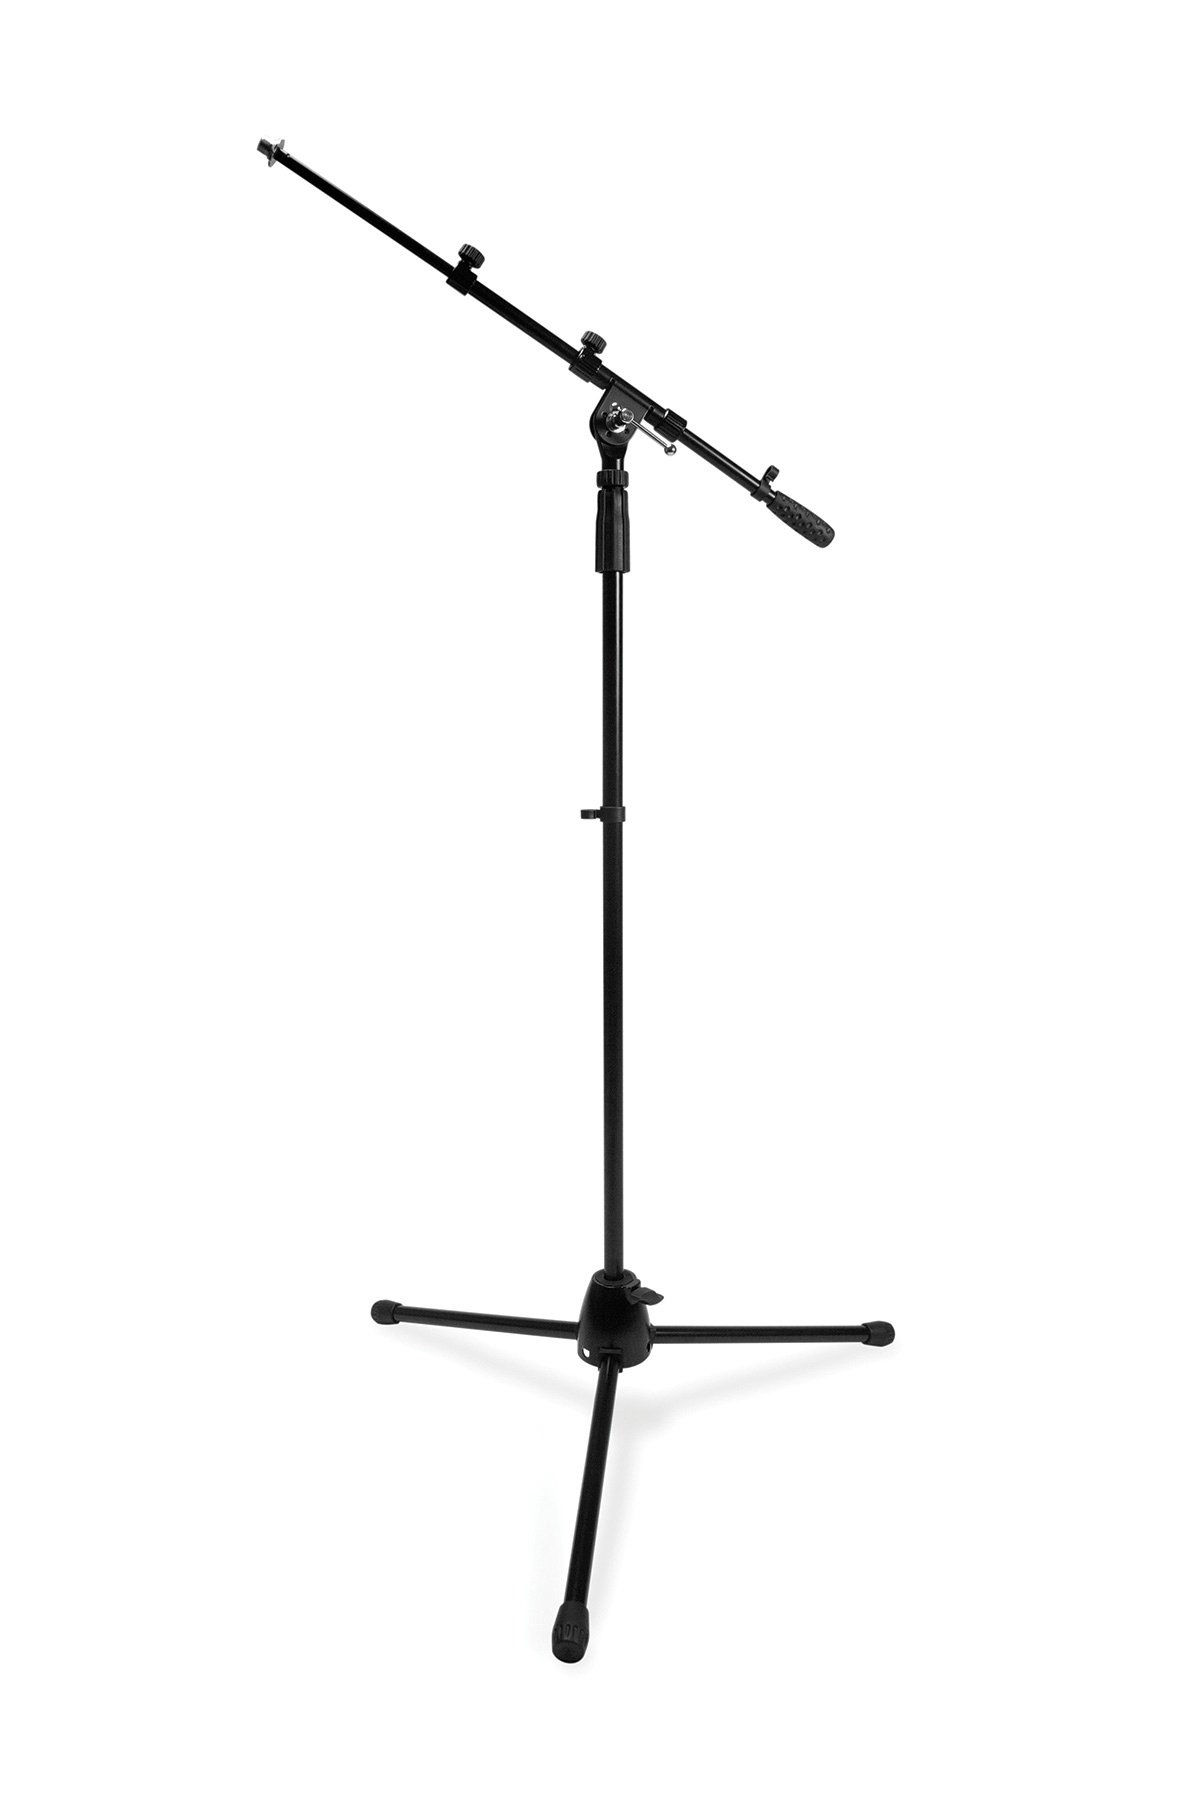 Photos - Microphone Stand Hosa MSB-521BK 71.7 Tripod Base  with Telescoping Boom Arm 